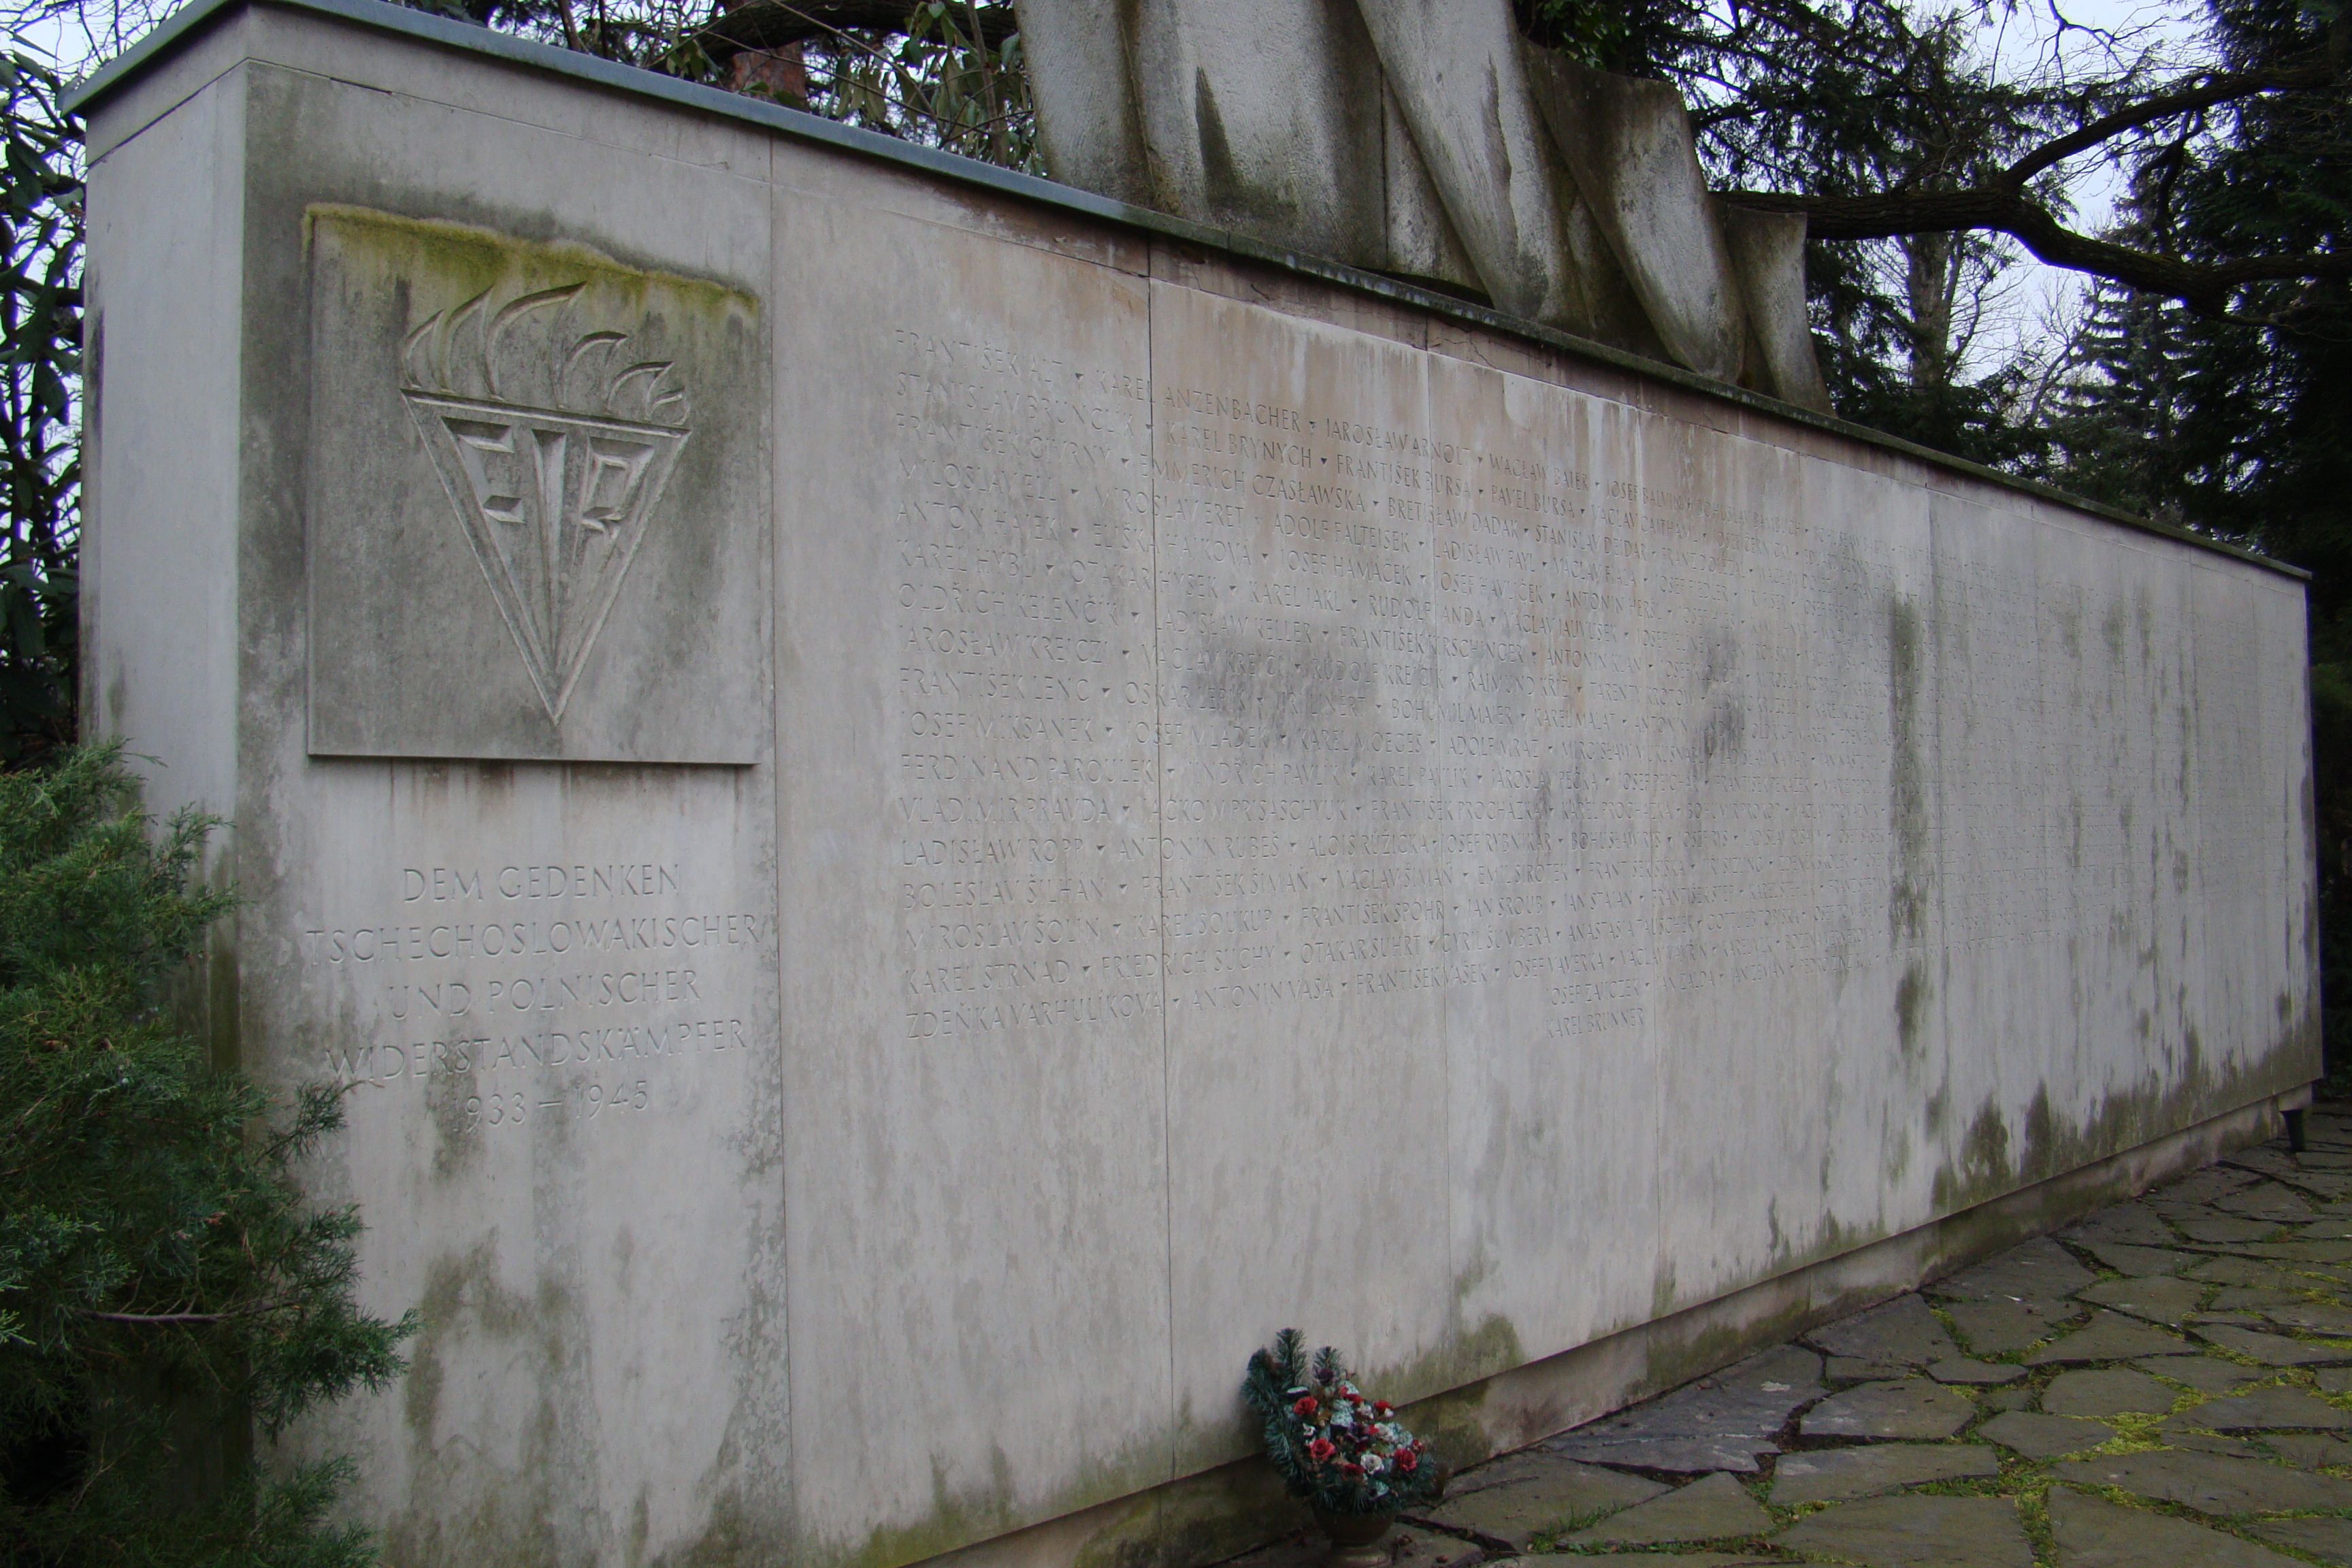 Collective memorial to Czech and Polish victims of World War II at the Johannisfriedhof cemetery